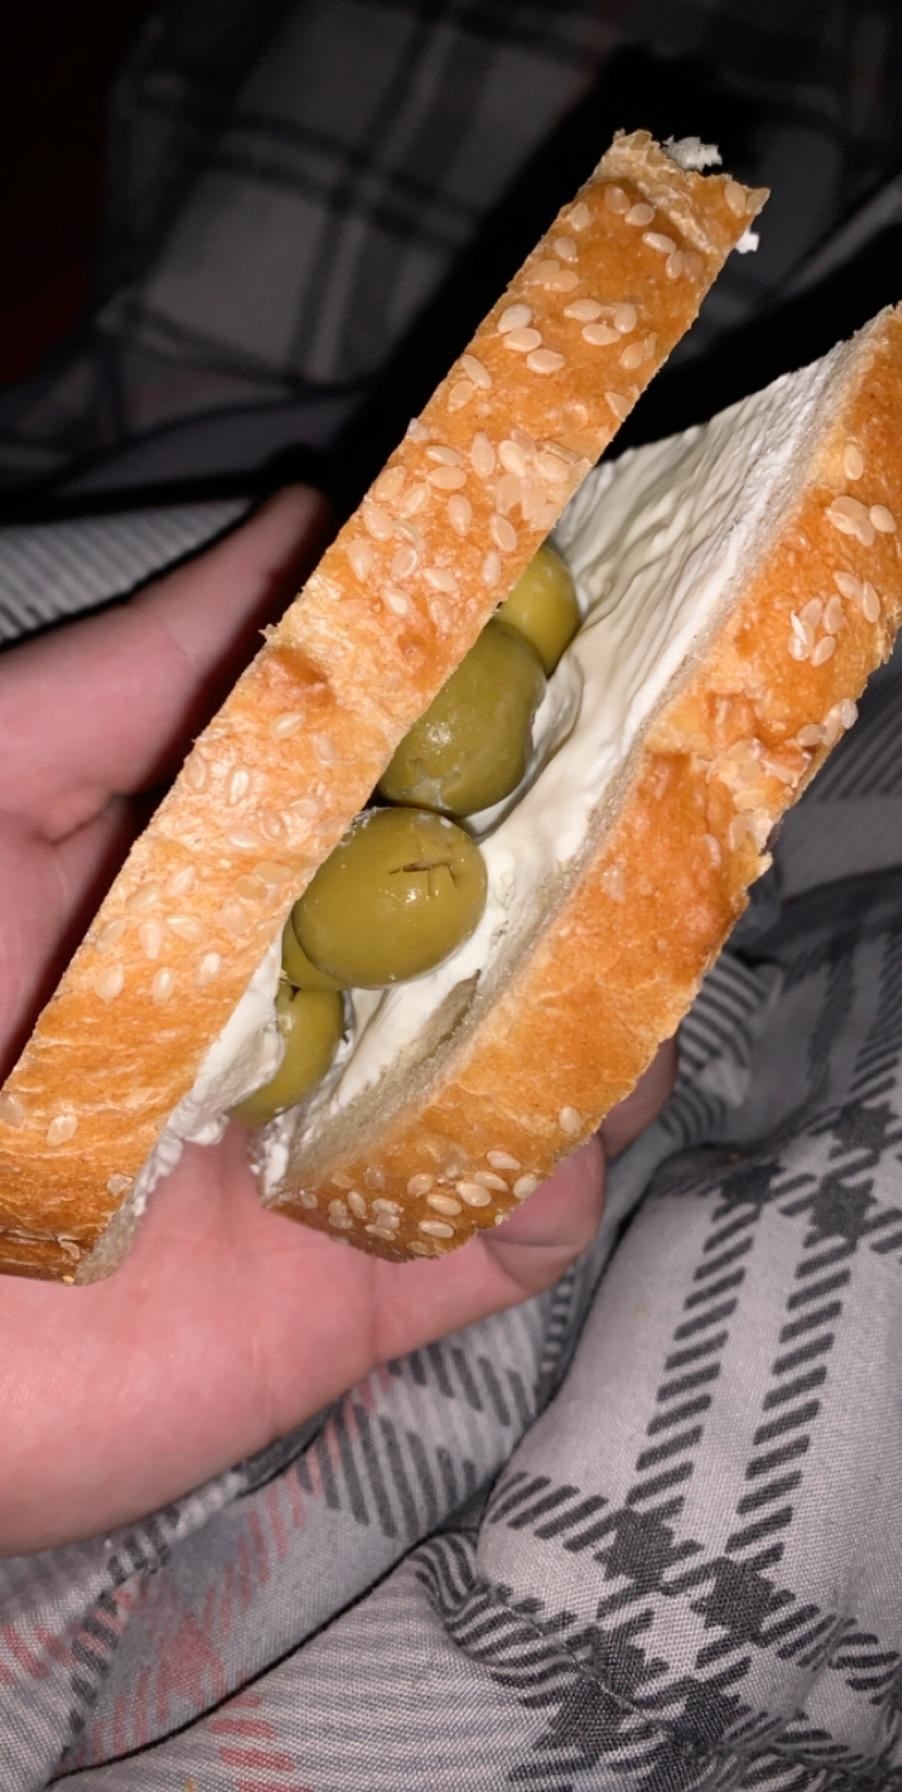 A cream cheese sandwich with green olives.